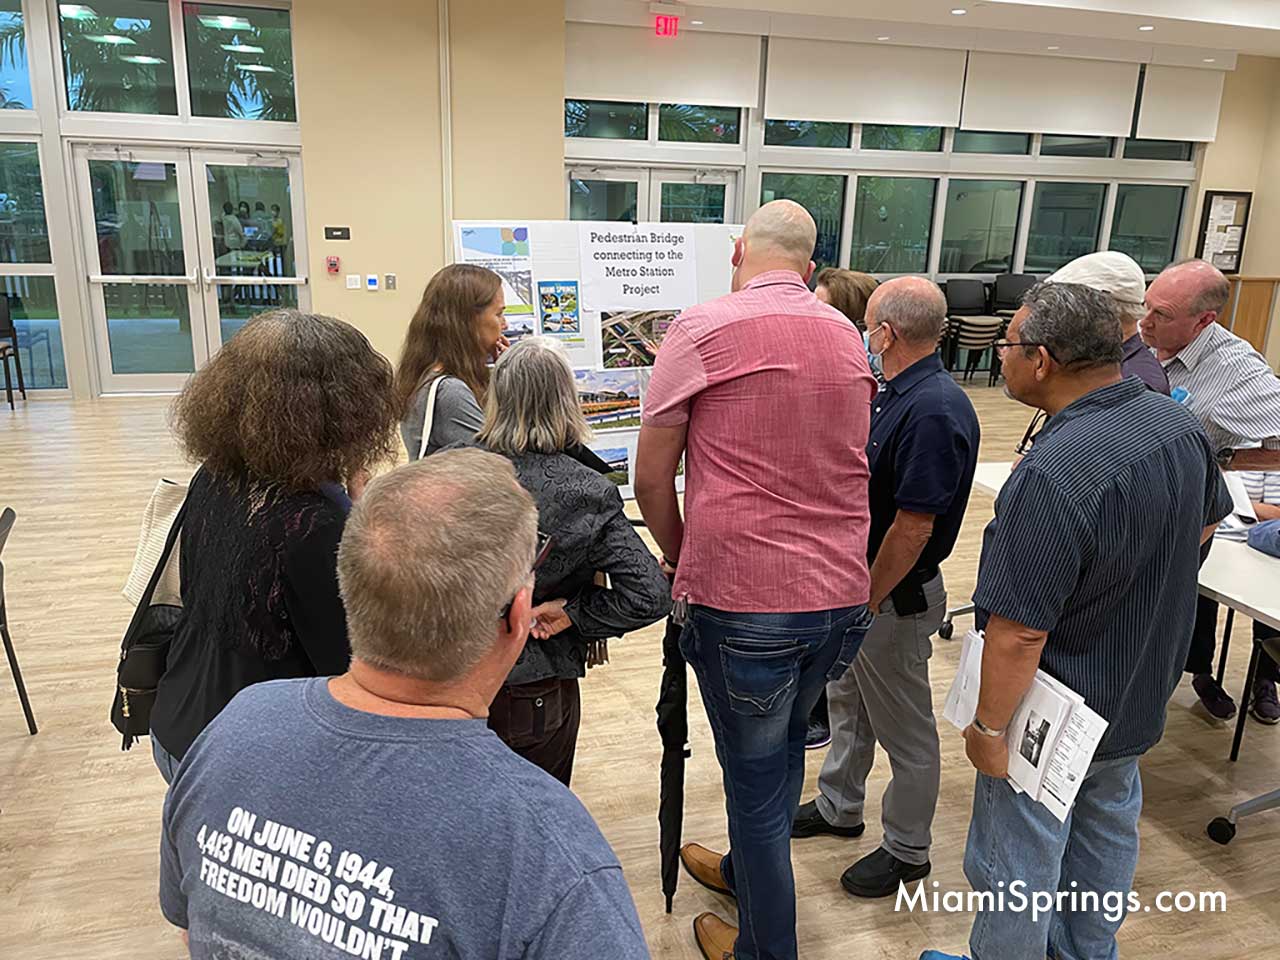 Residents expressed their concerns over adding a pedestrian bridge to the MetroRail.